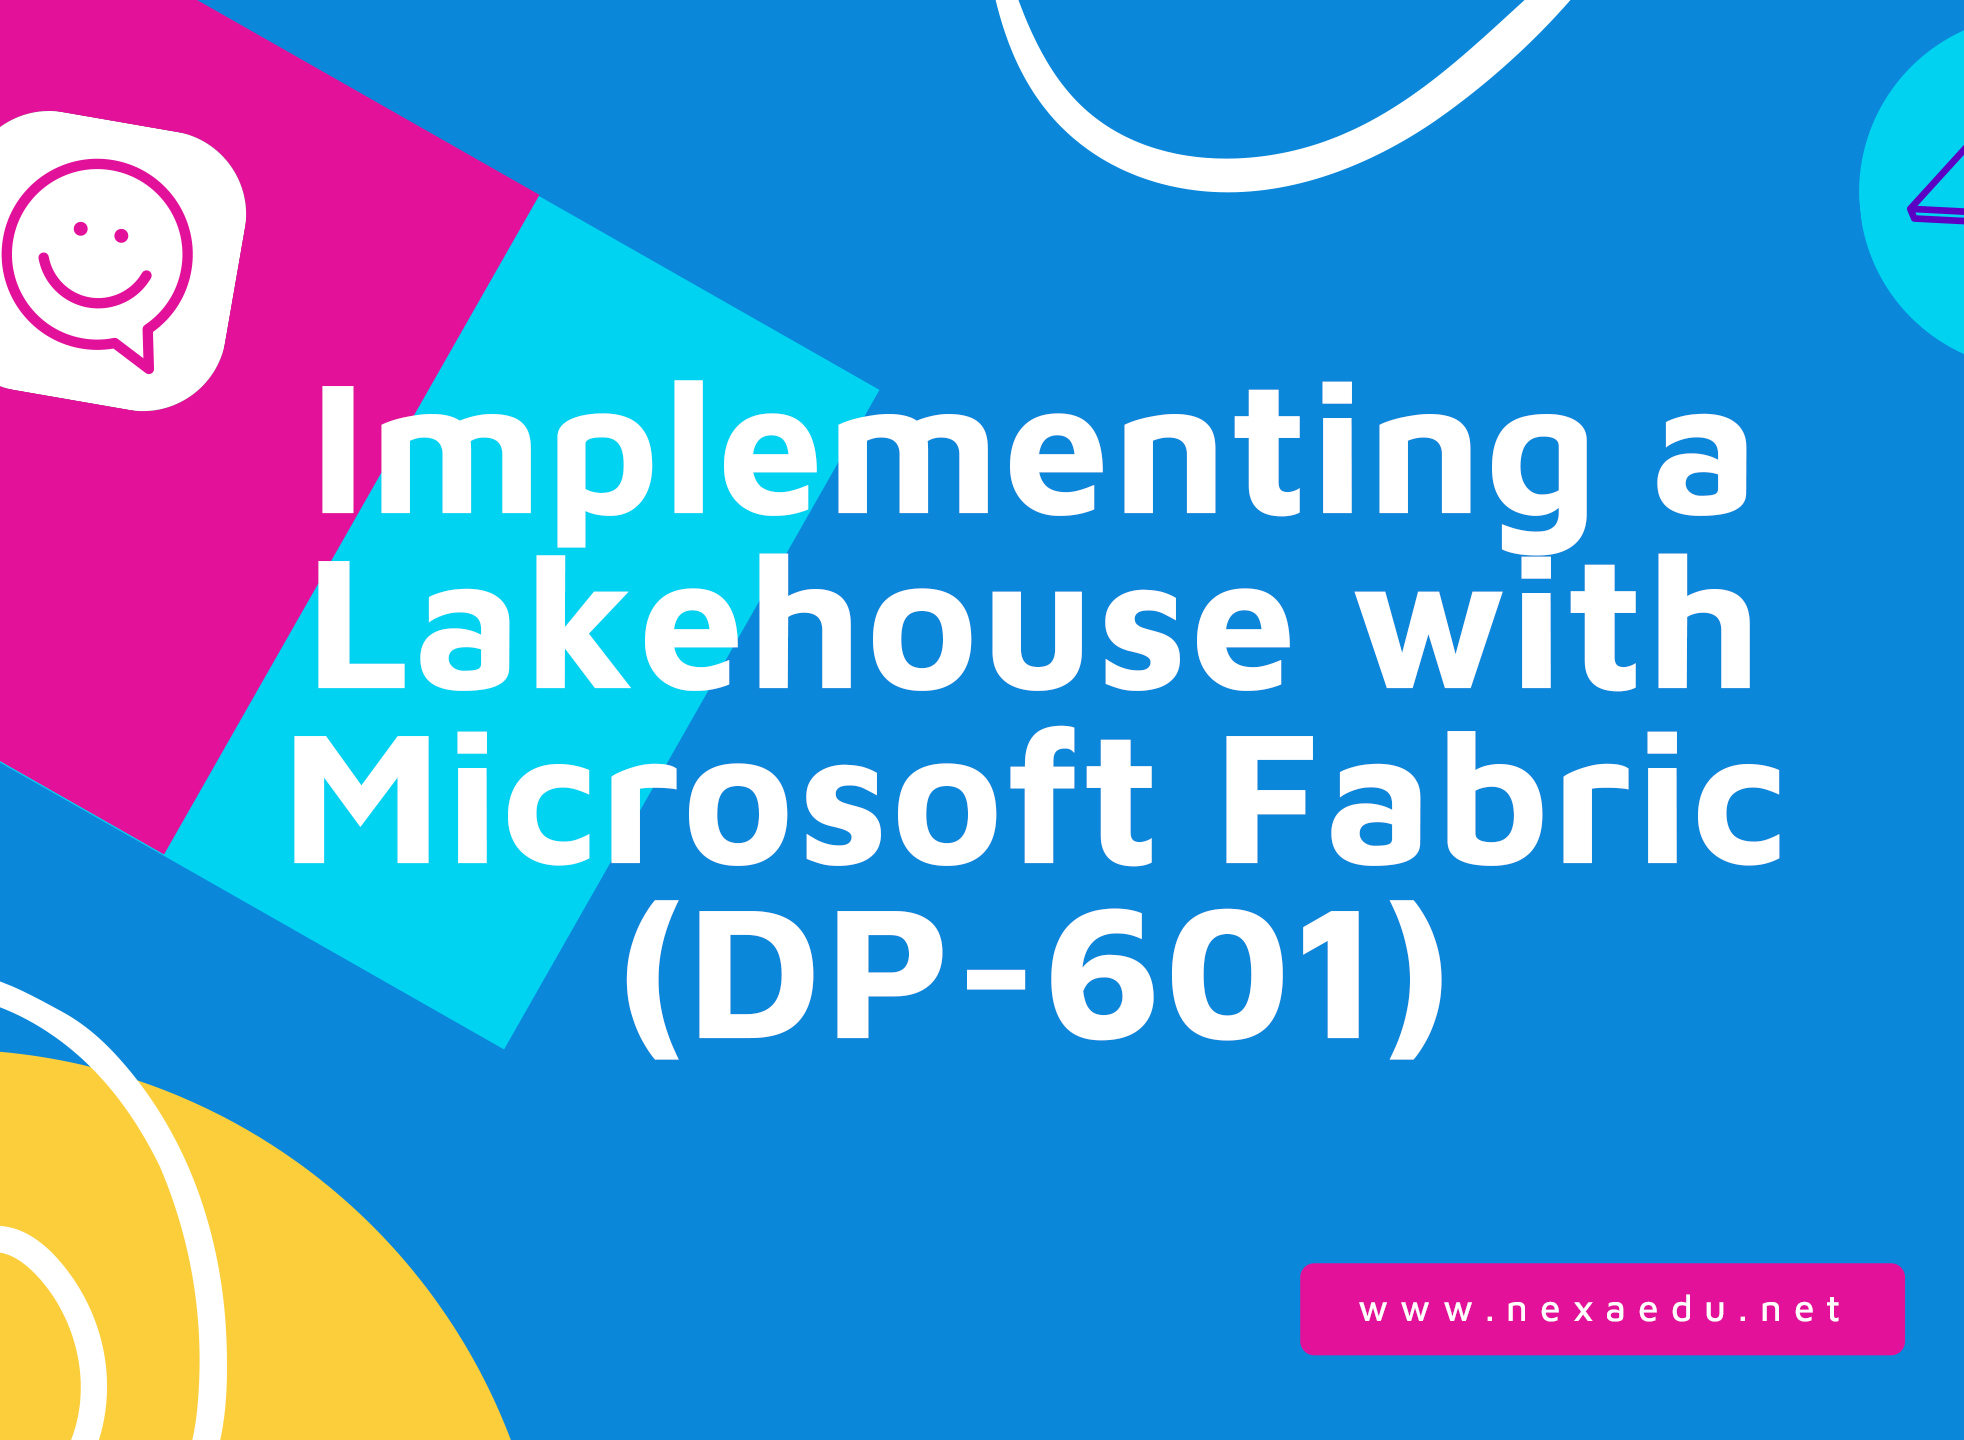 Implementing a Lakehouse with Microsoft Fabric (DP-601)